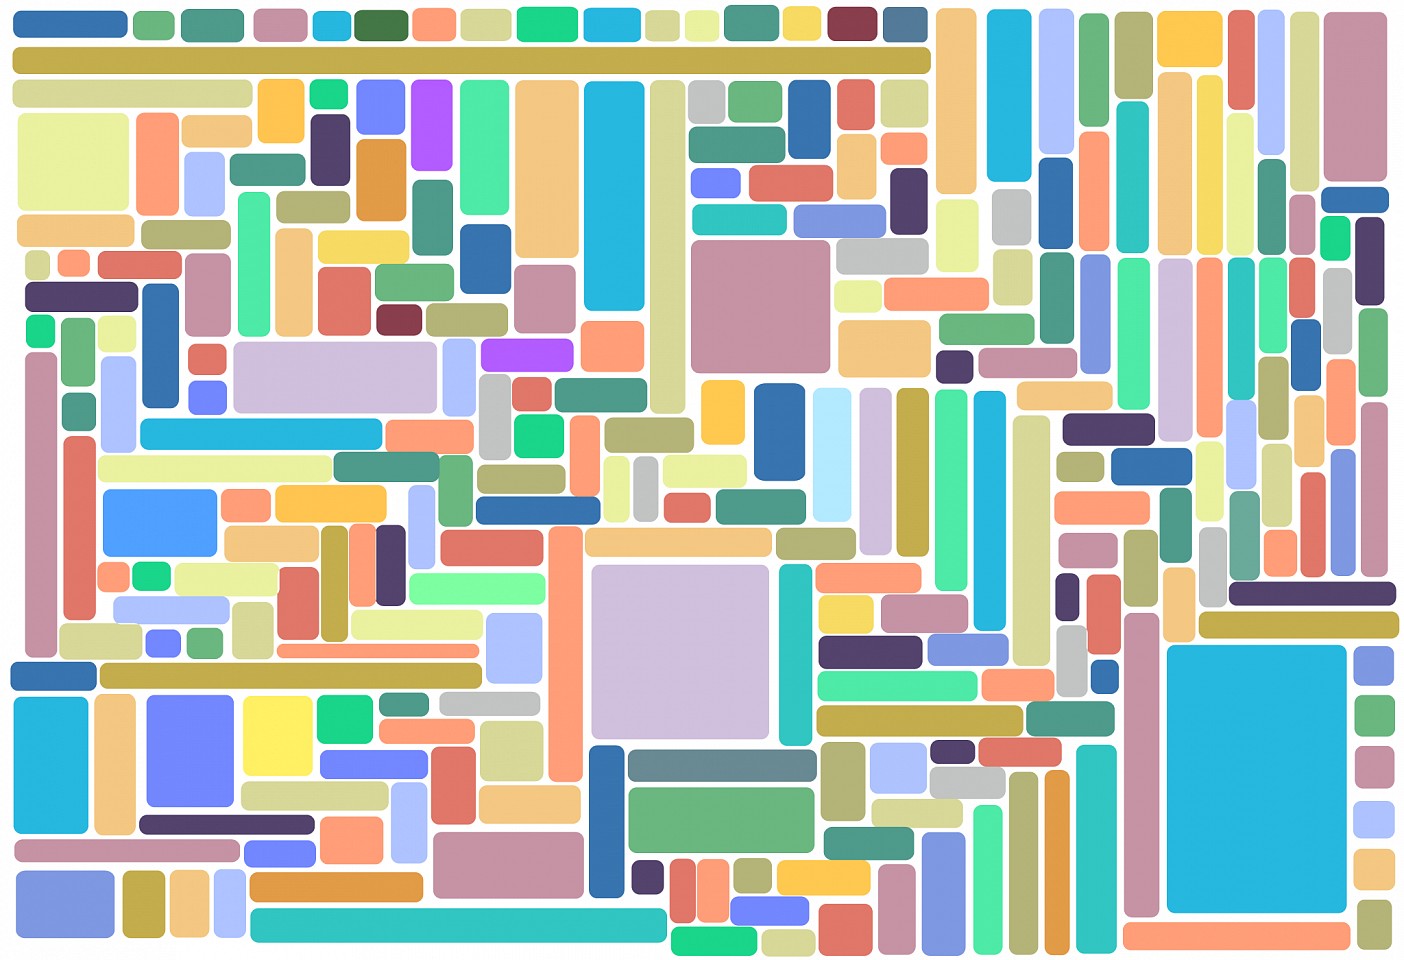 Dane Albert, Color Bars #9 Day, 2023
Acrylic on canvas (Concept), 48 x 72 in. (121.9 x 182.9 cm)
Series of colored lines and shapes in multiple configurations
DA.2023.bars-009